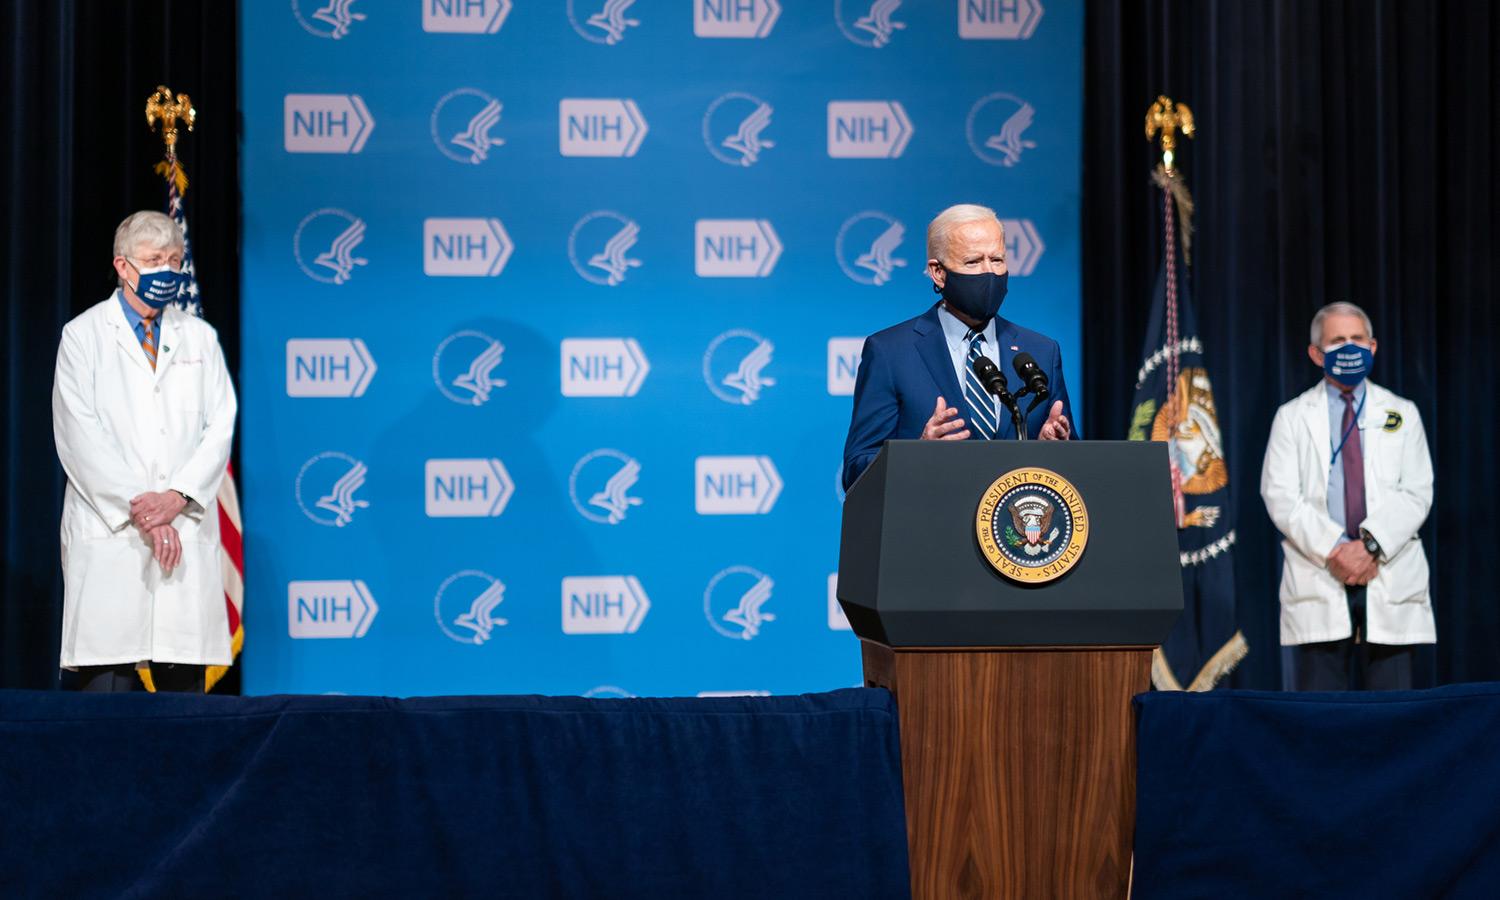 President Biden speaking at the National Institutes of Health headquarters in Bethesda, MD, flanked by NIH director Dr. Francis Collins and Dr. Anthony Fauci 